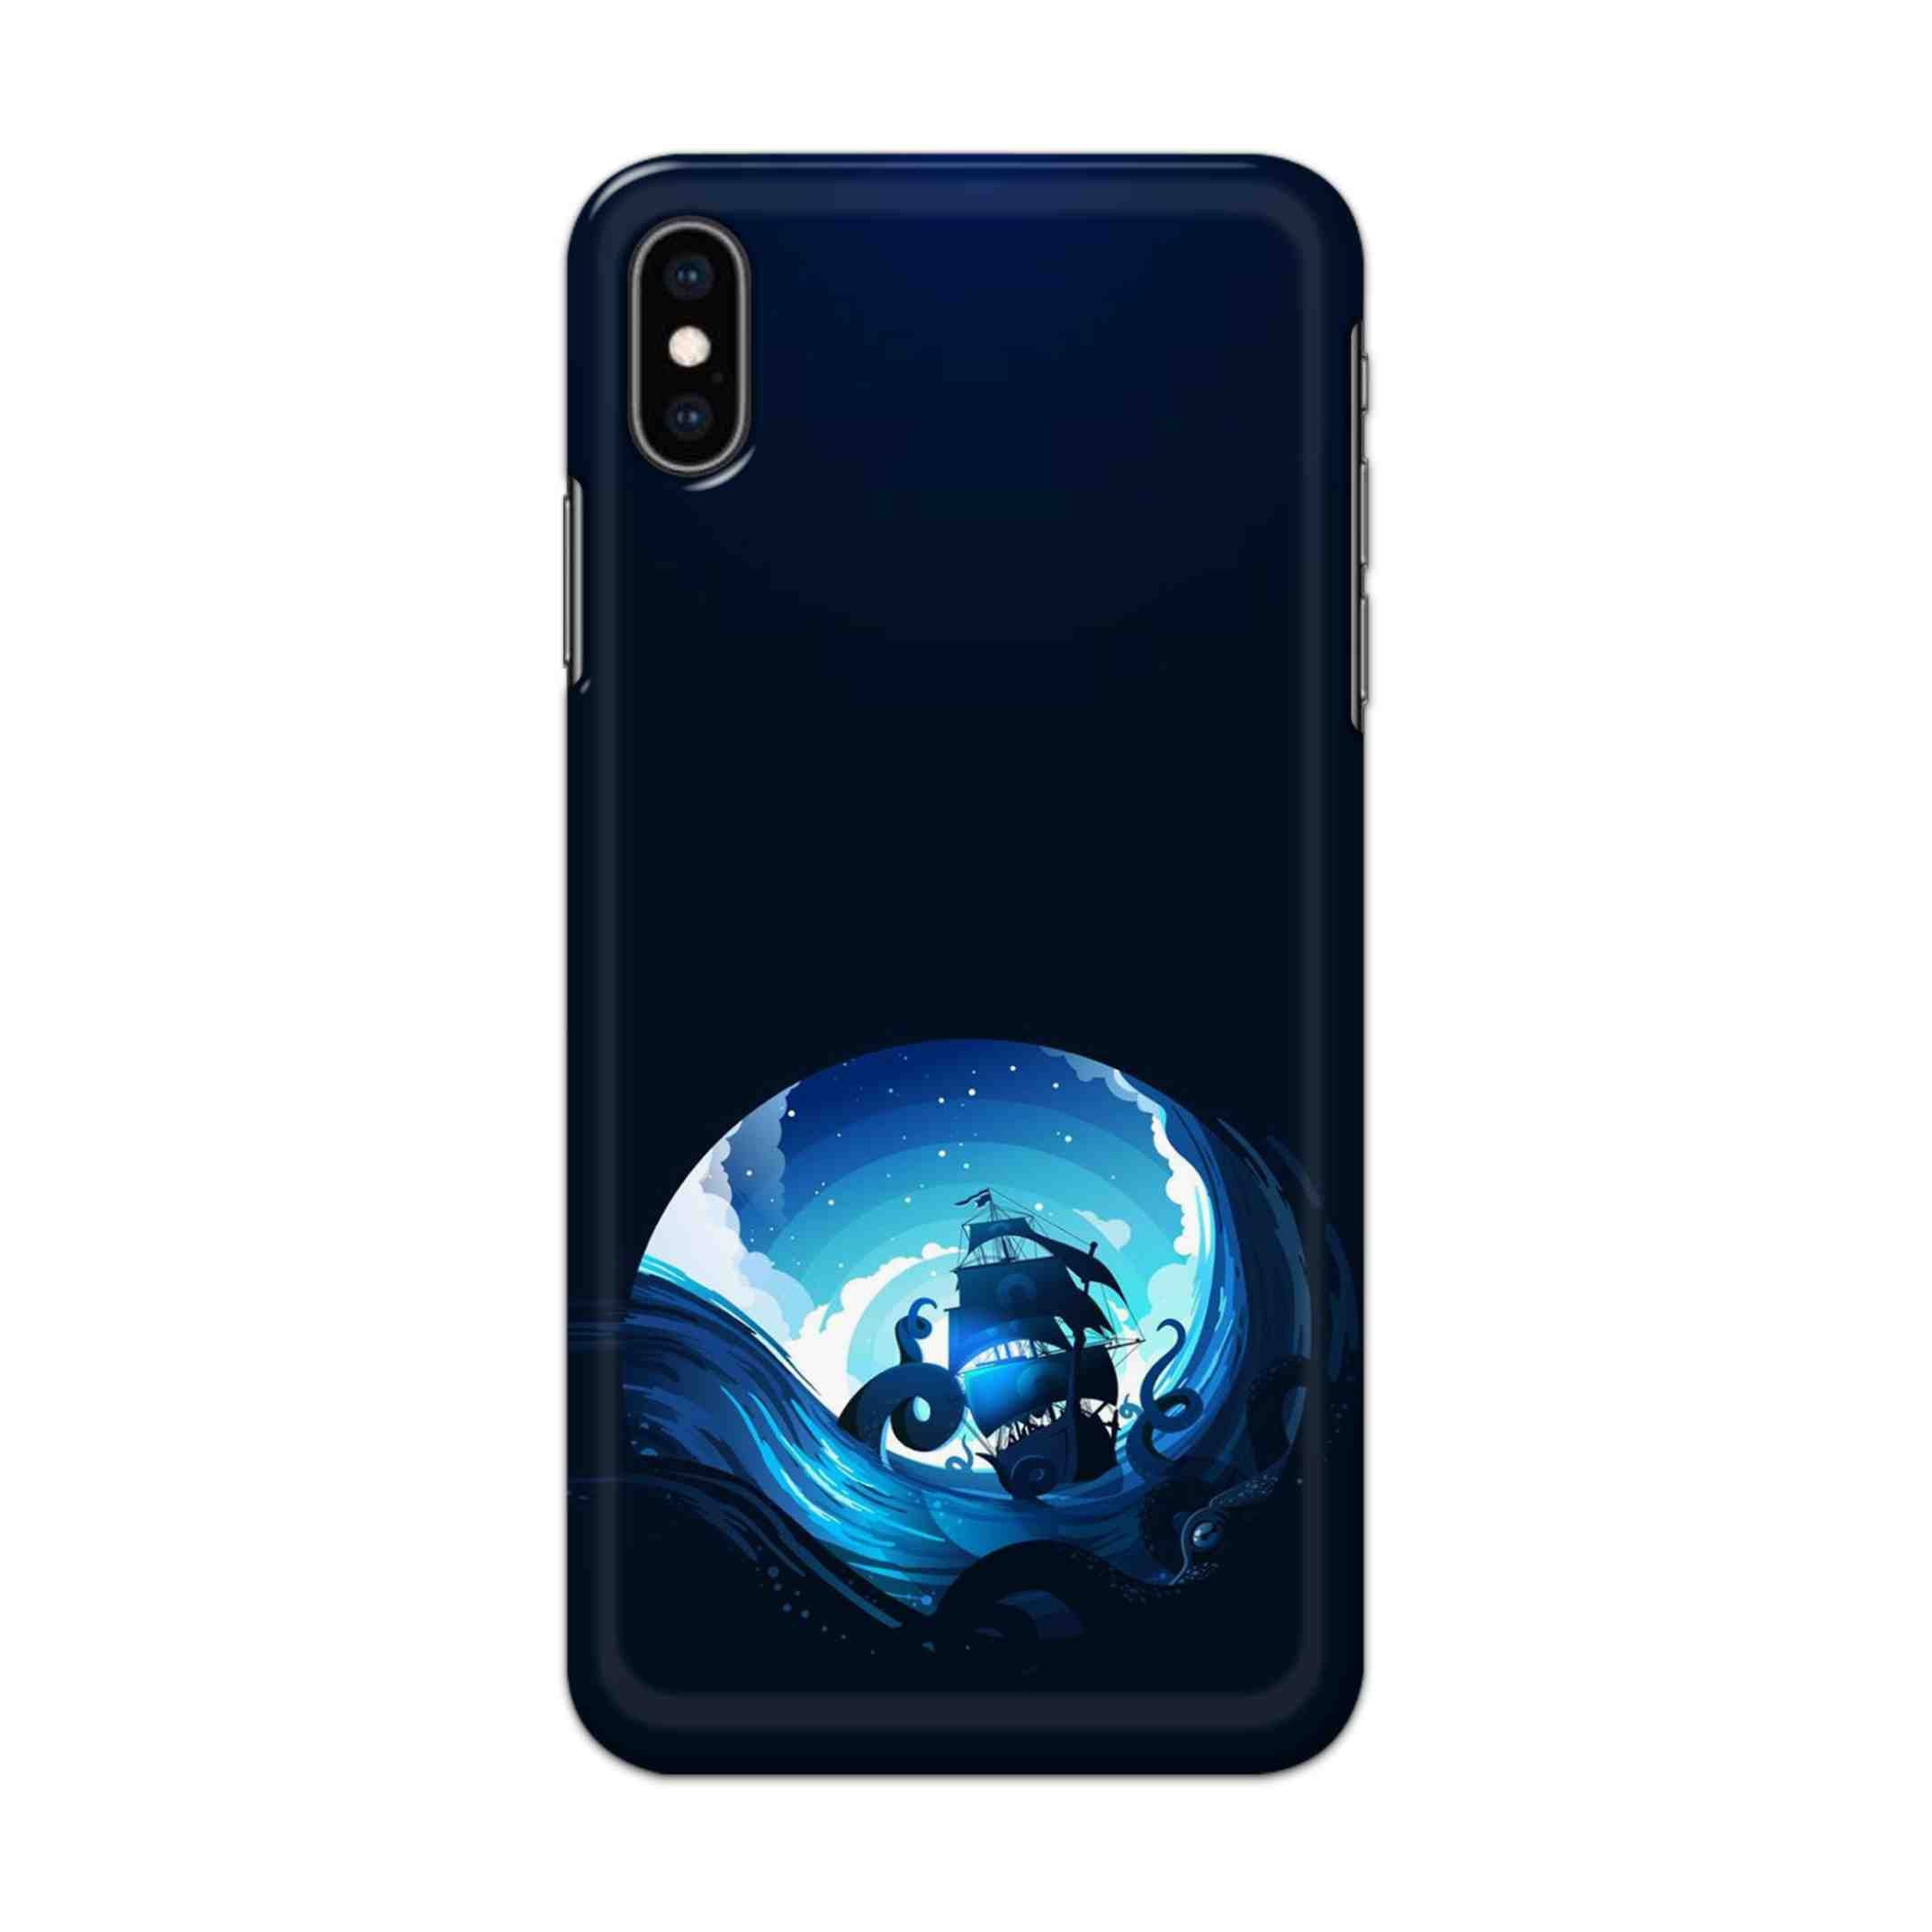 Buy Blue Seaship Hard Back Mobile Phone Case/Cover For iPhone XS MAX Online